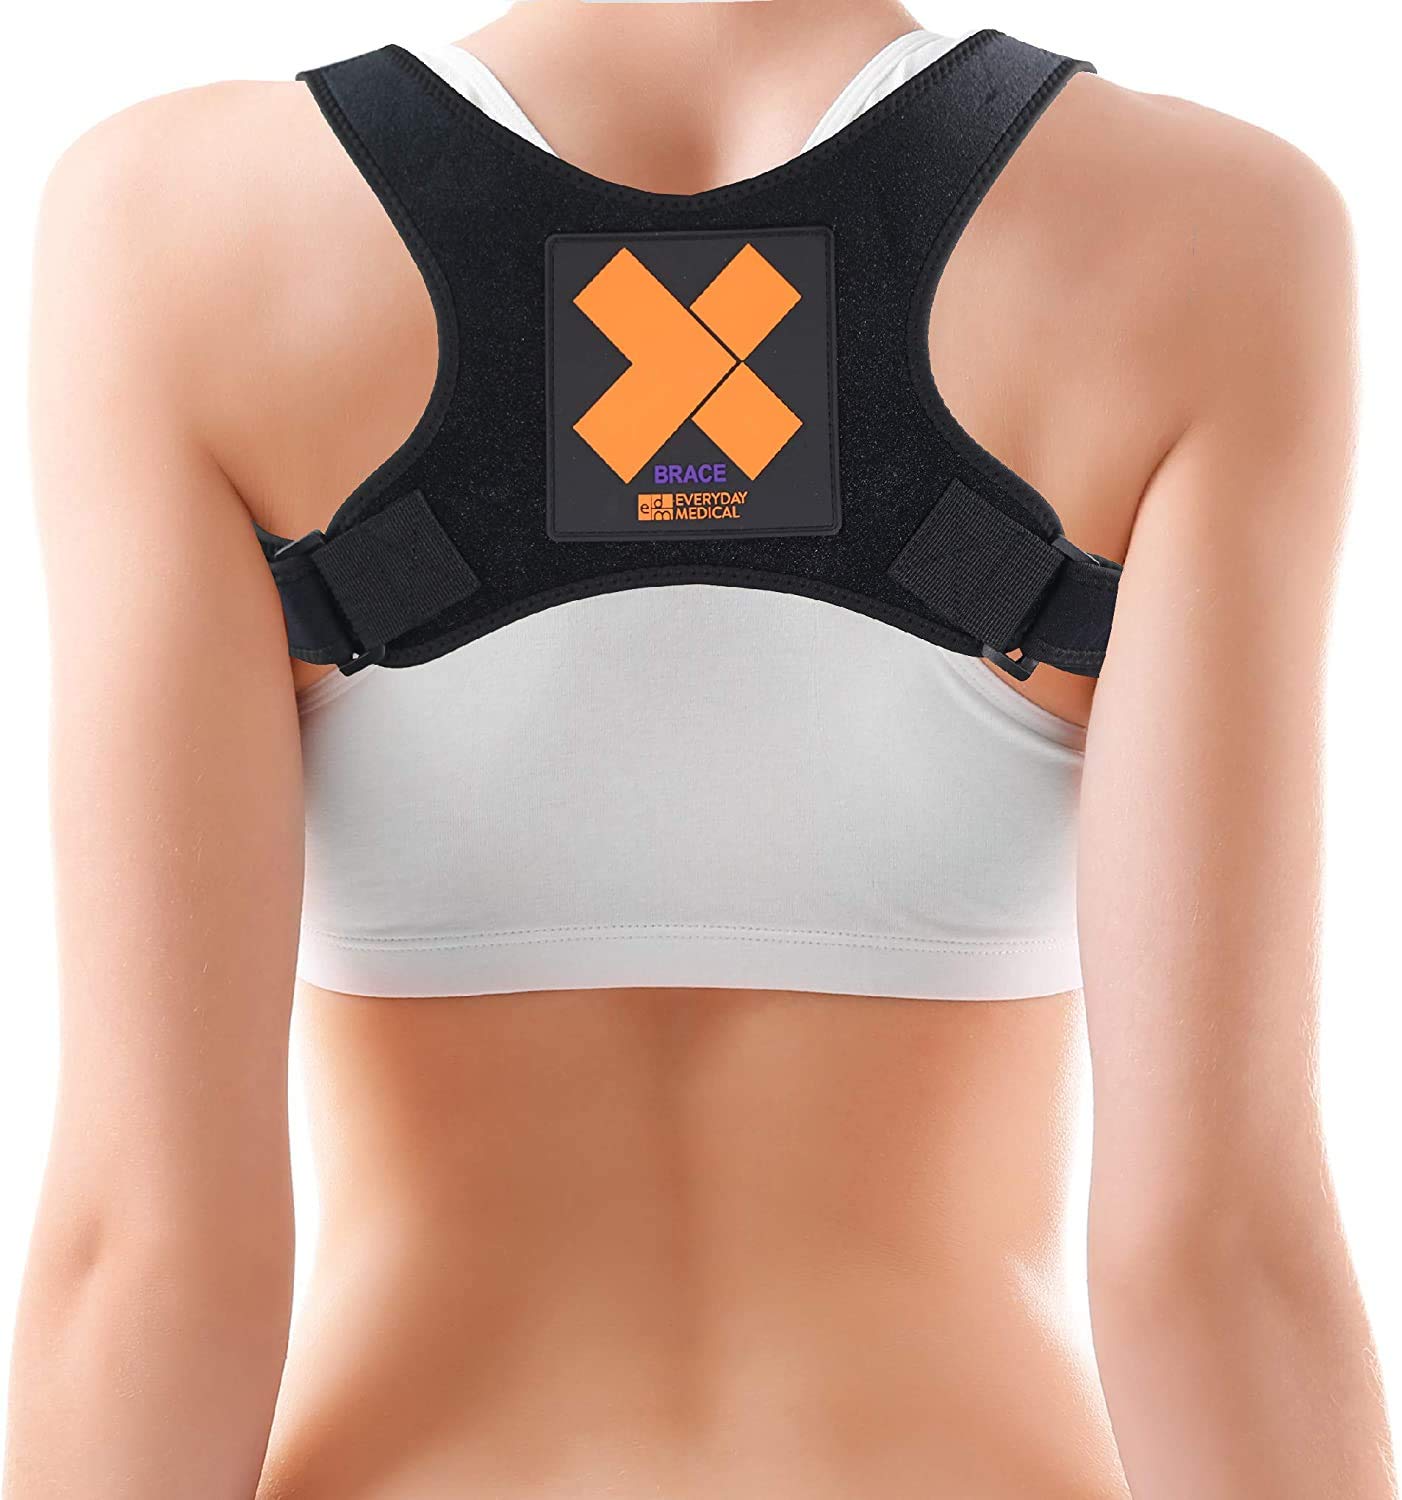 X Brace I Posture Corrector Back Brace for Men and Women by